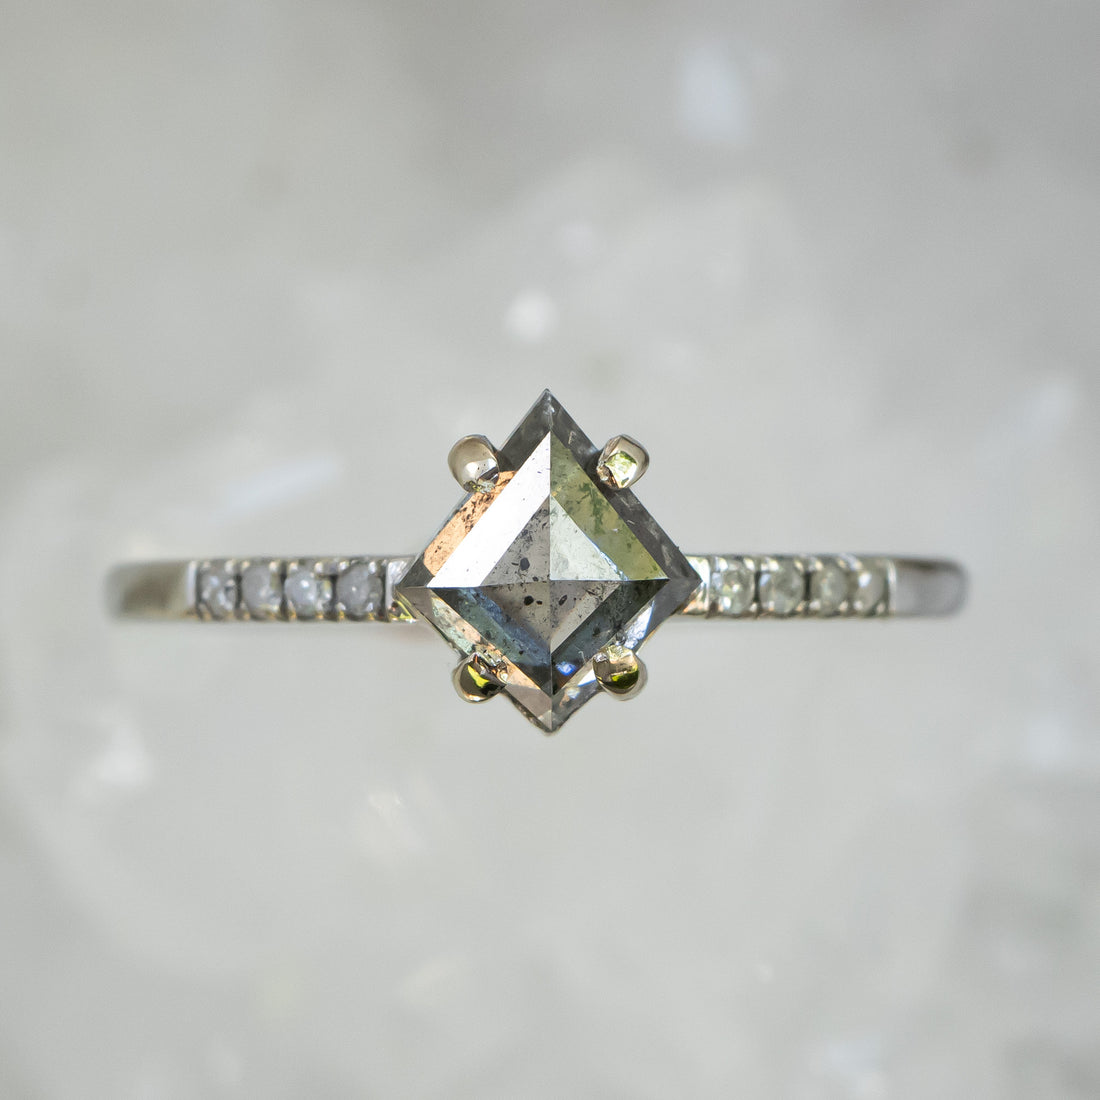 Ready to to ship: Salt and Pepper Kite Accent diamond Ring 14k White Gold, Size 7 - Salt and Pepper Diamond Ring- mossNstone